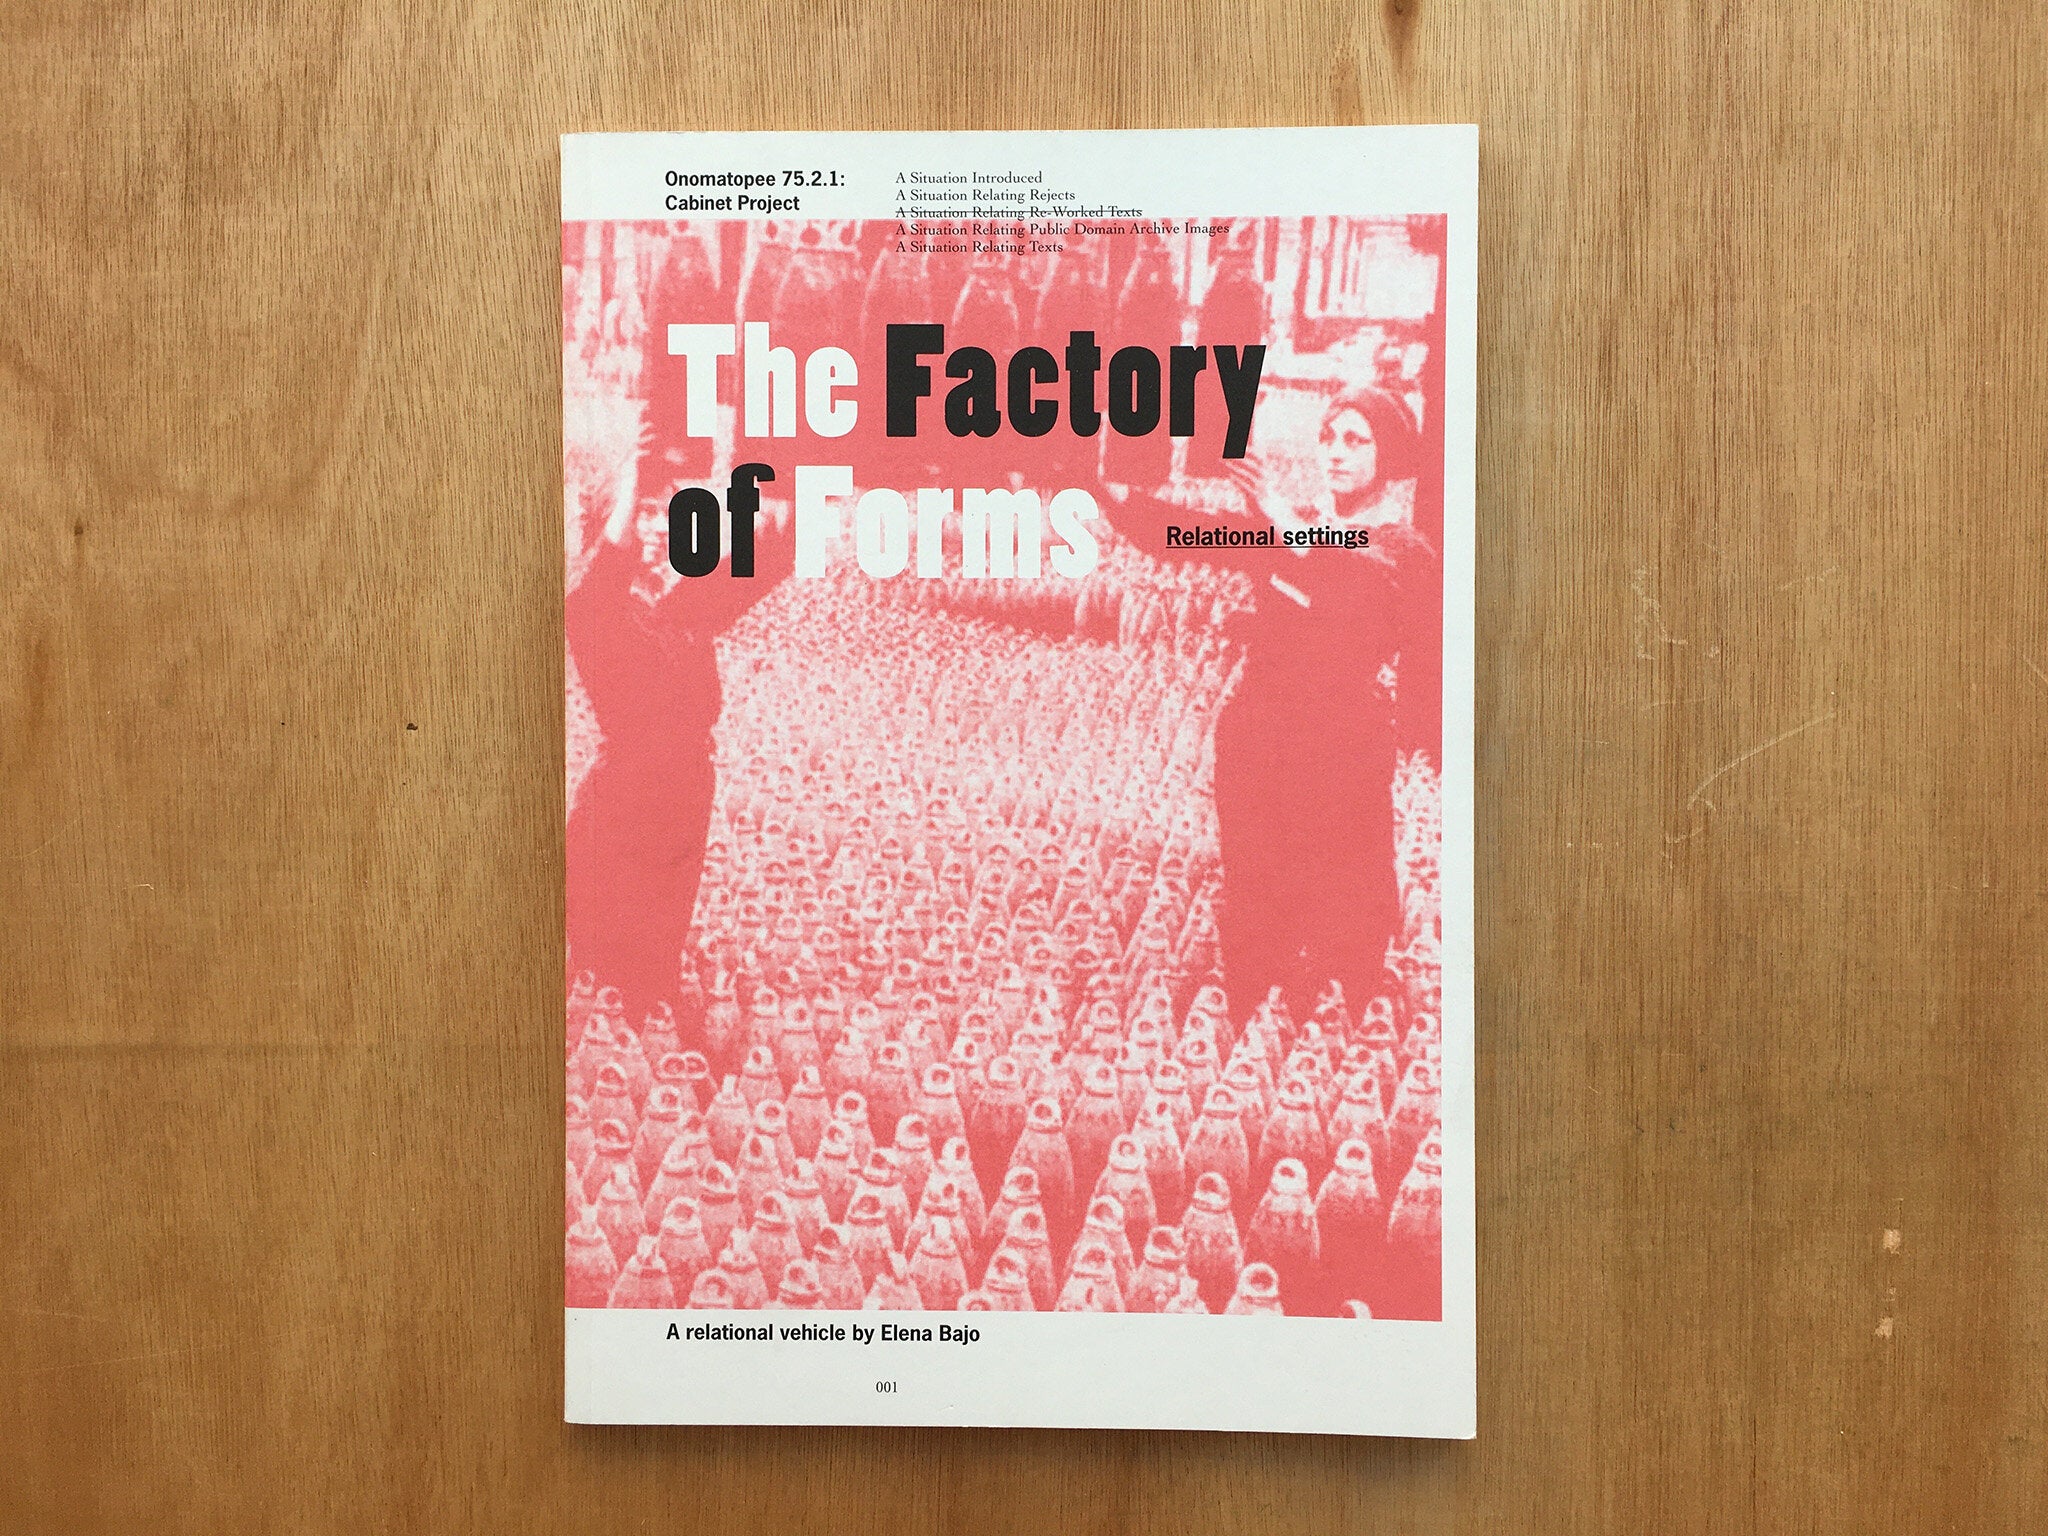 THE FACTORY OF FORMS by Elena Bajo